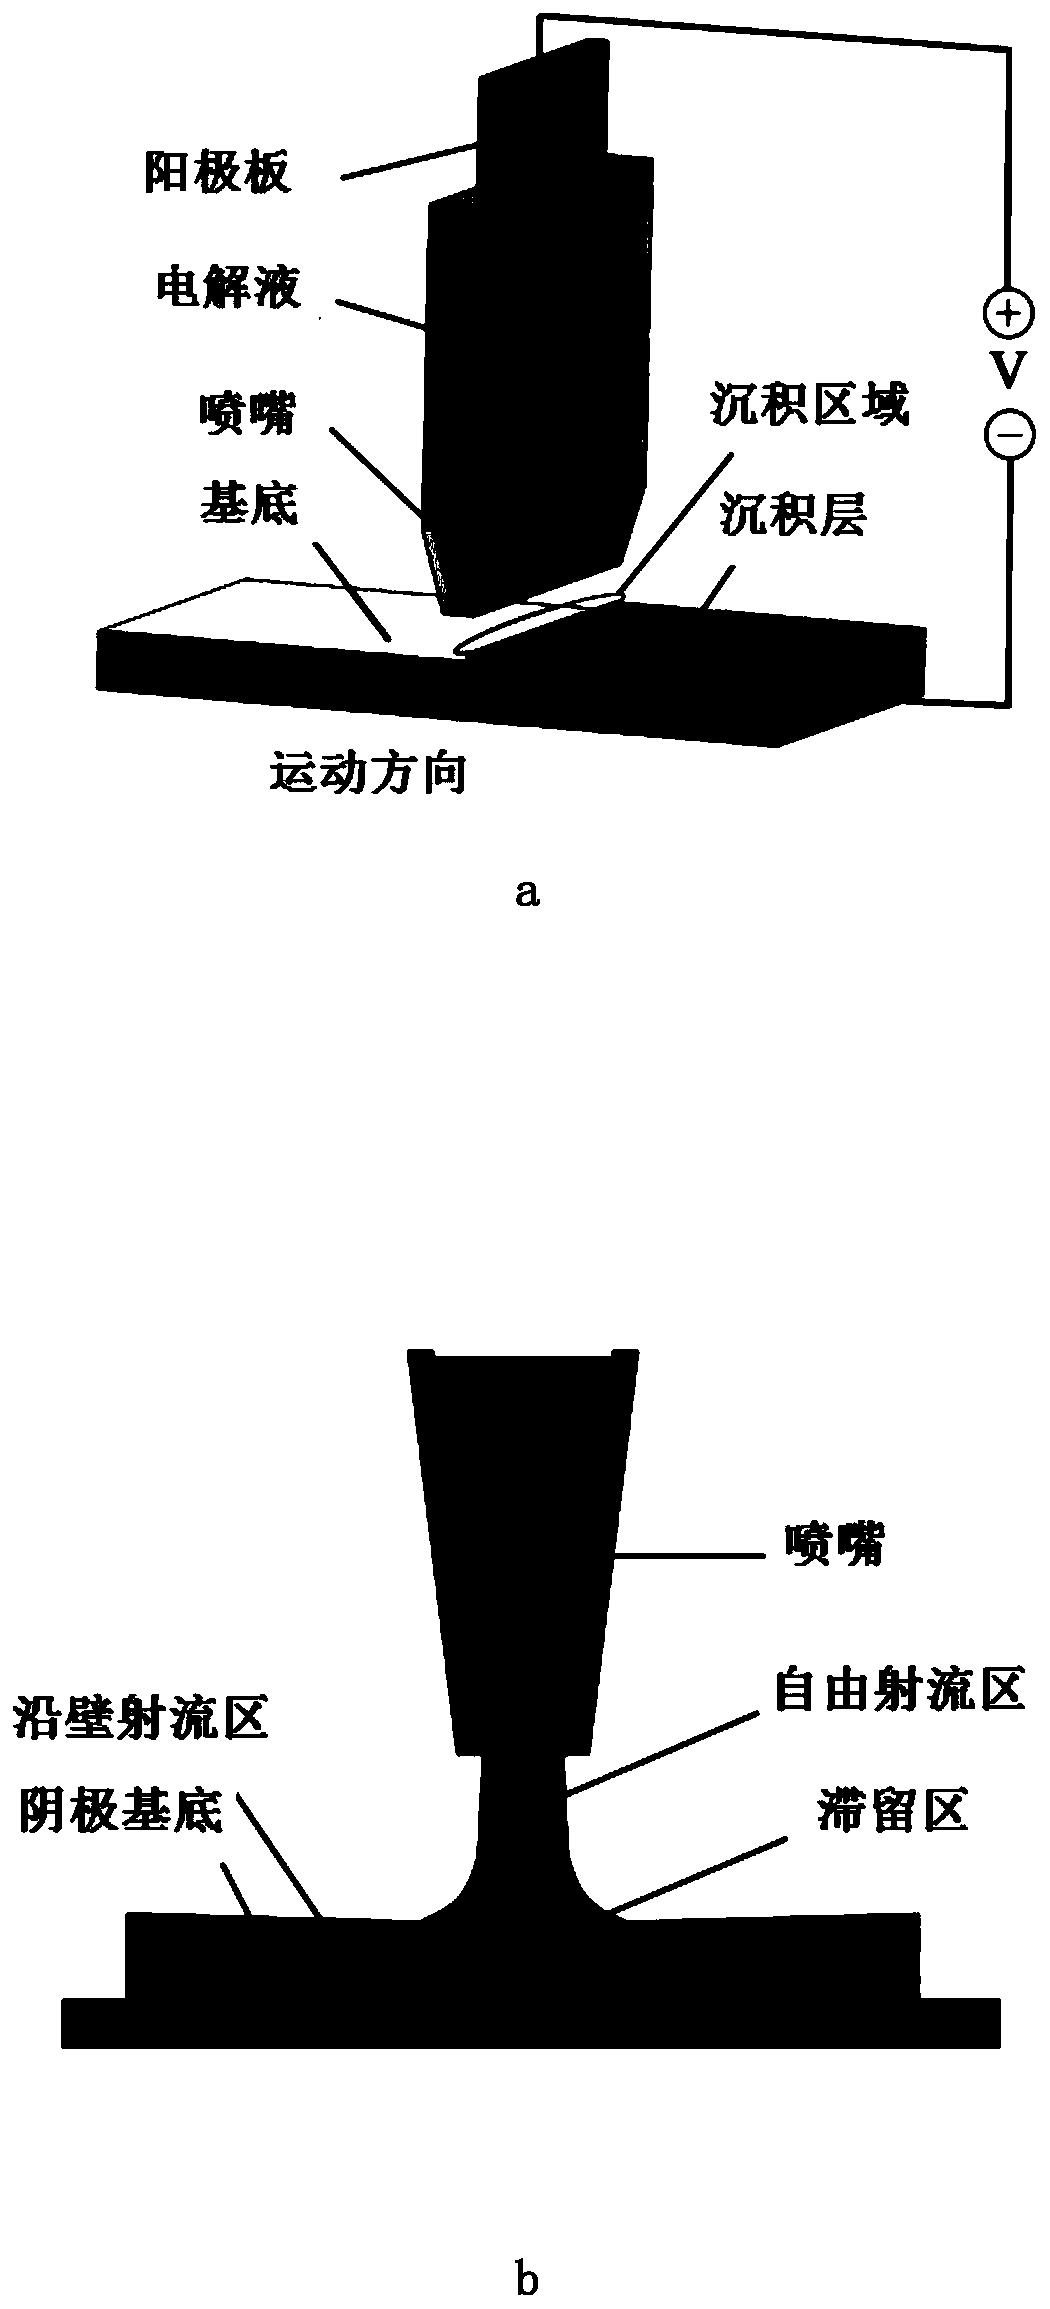 Processing method of solid lubricating coating for surface texture